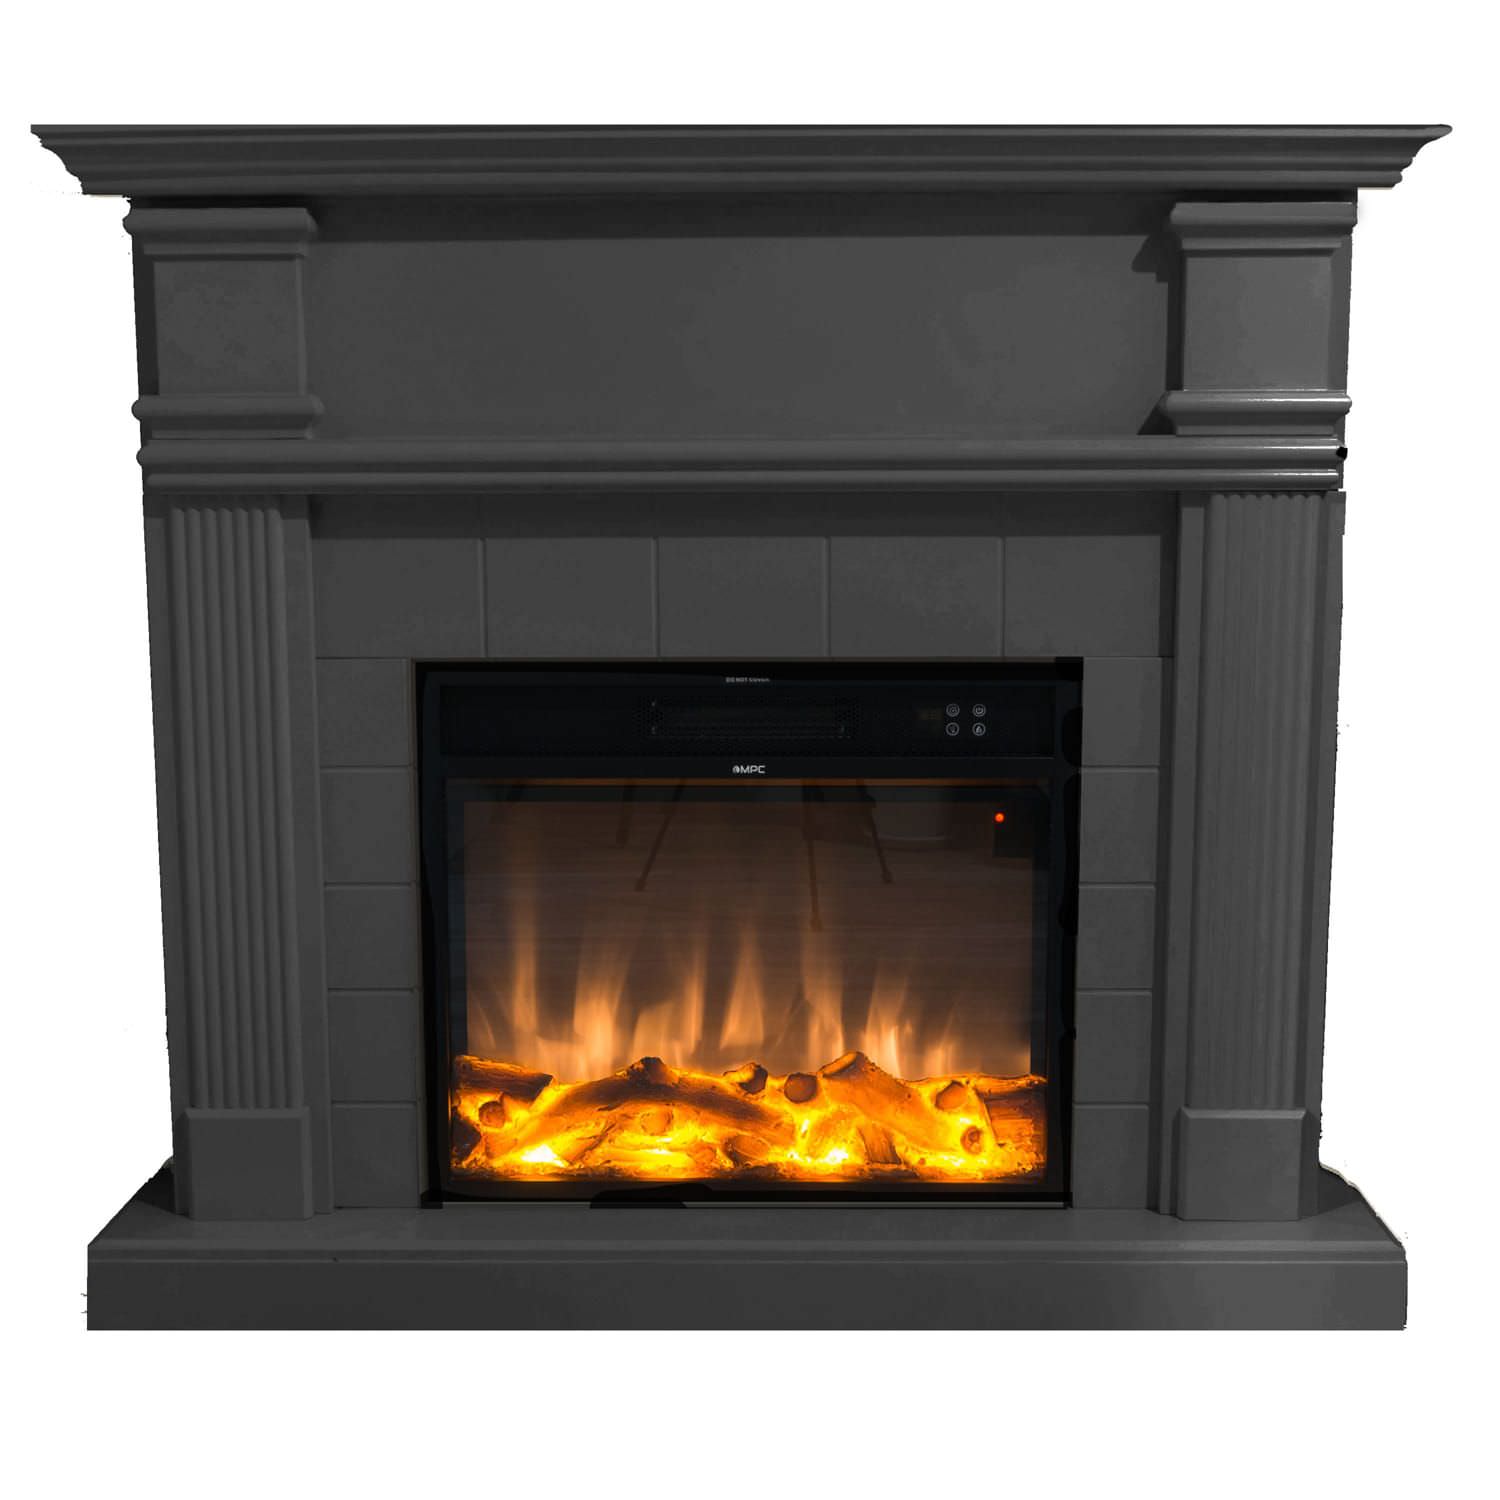 Gray Electric Fireplace For Decorating